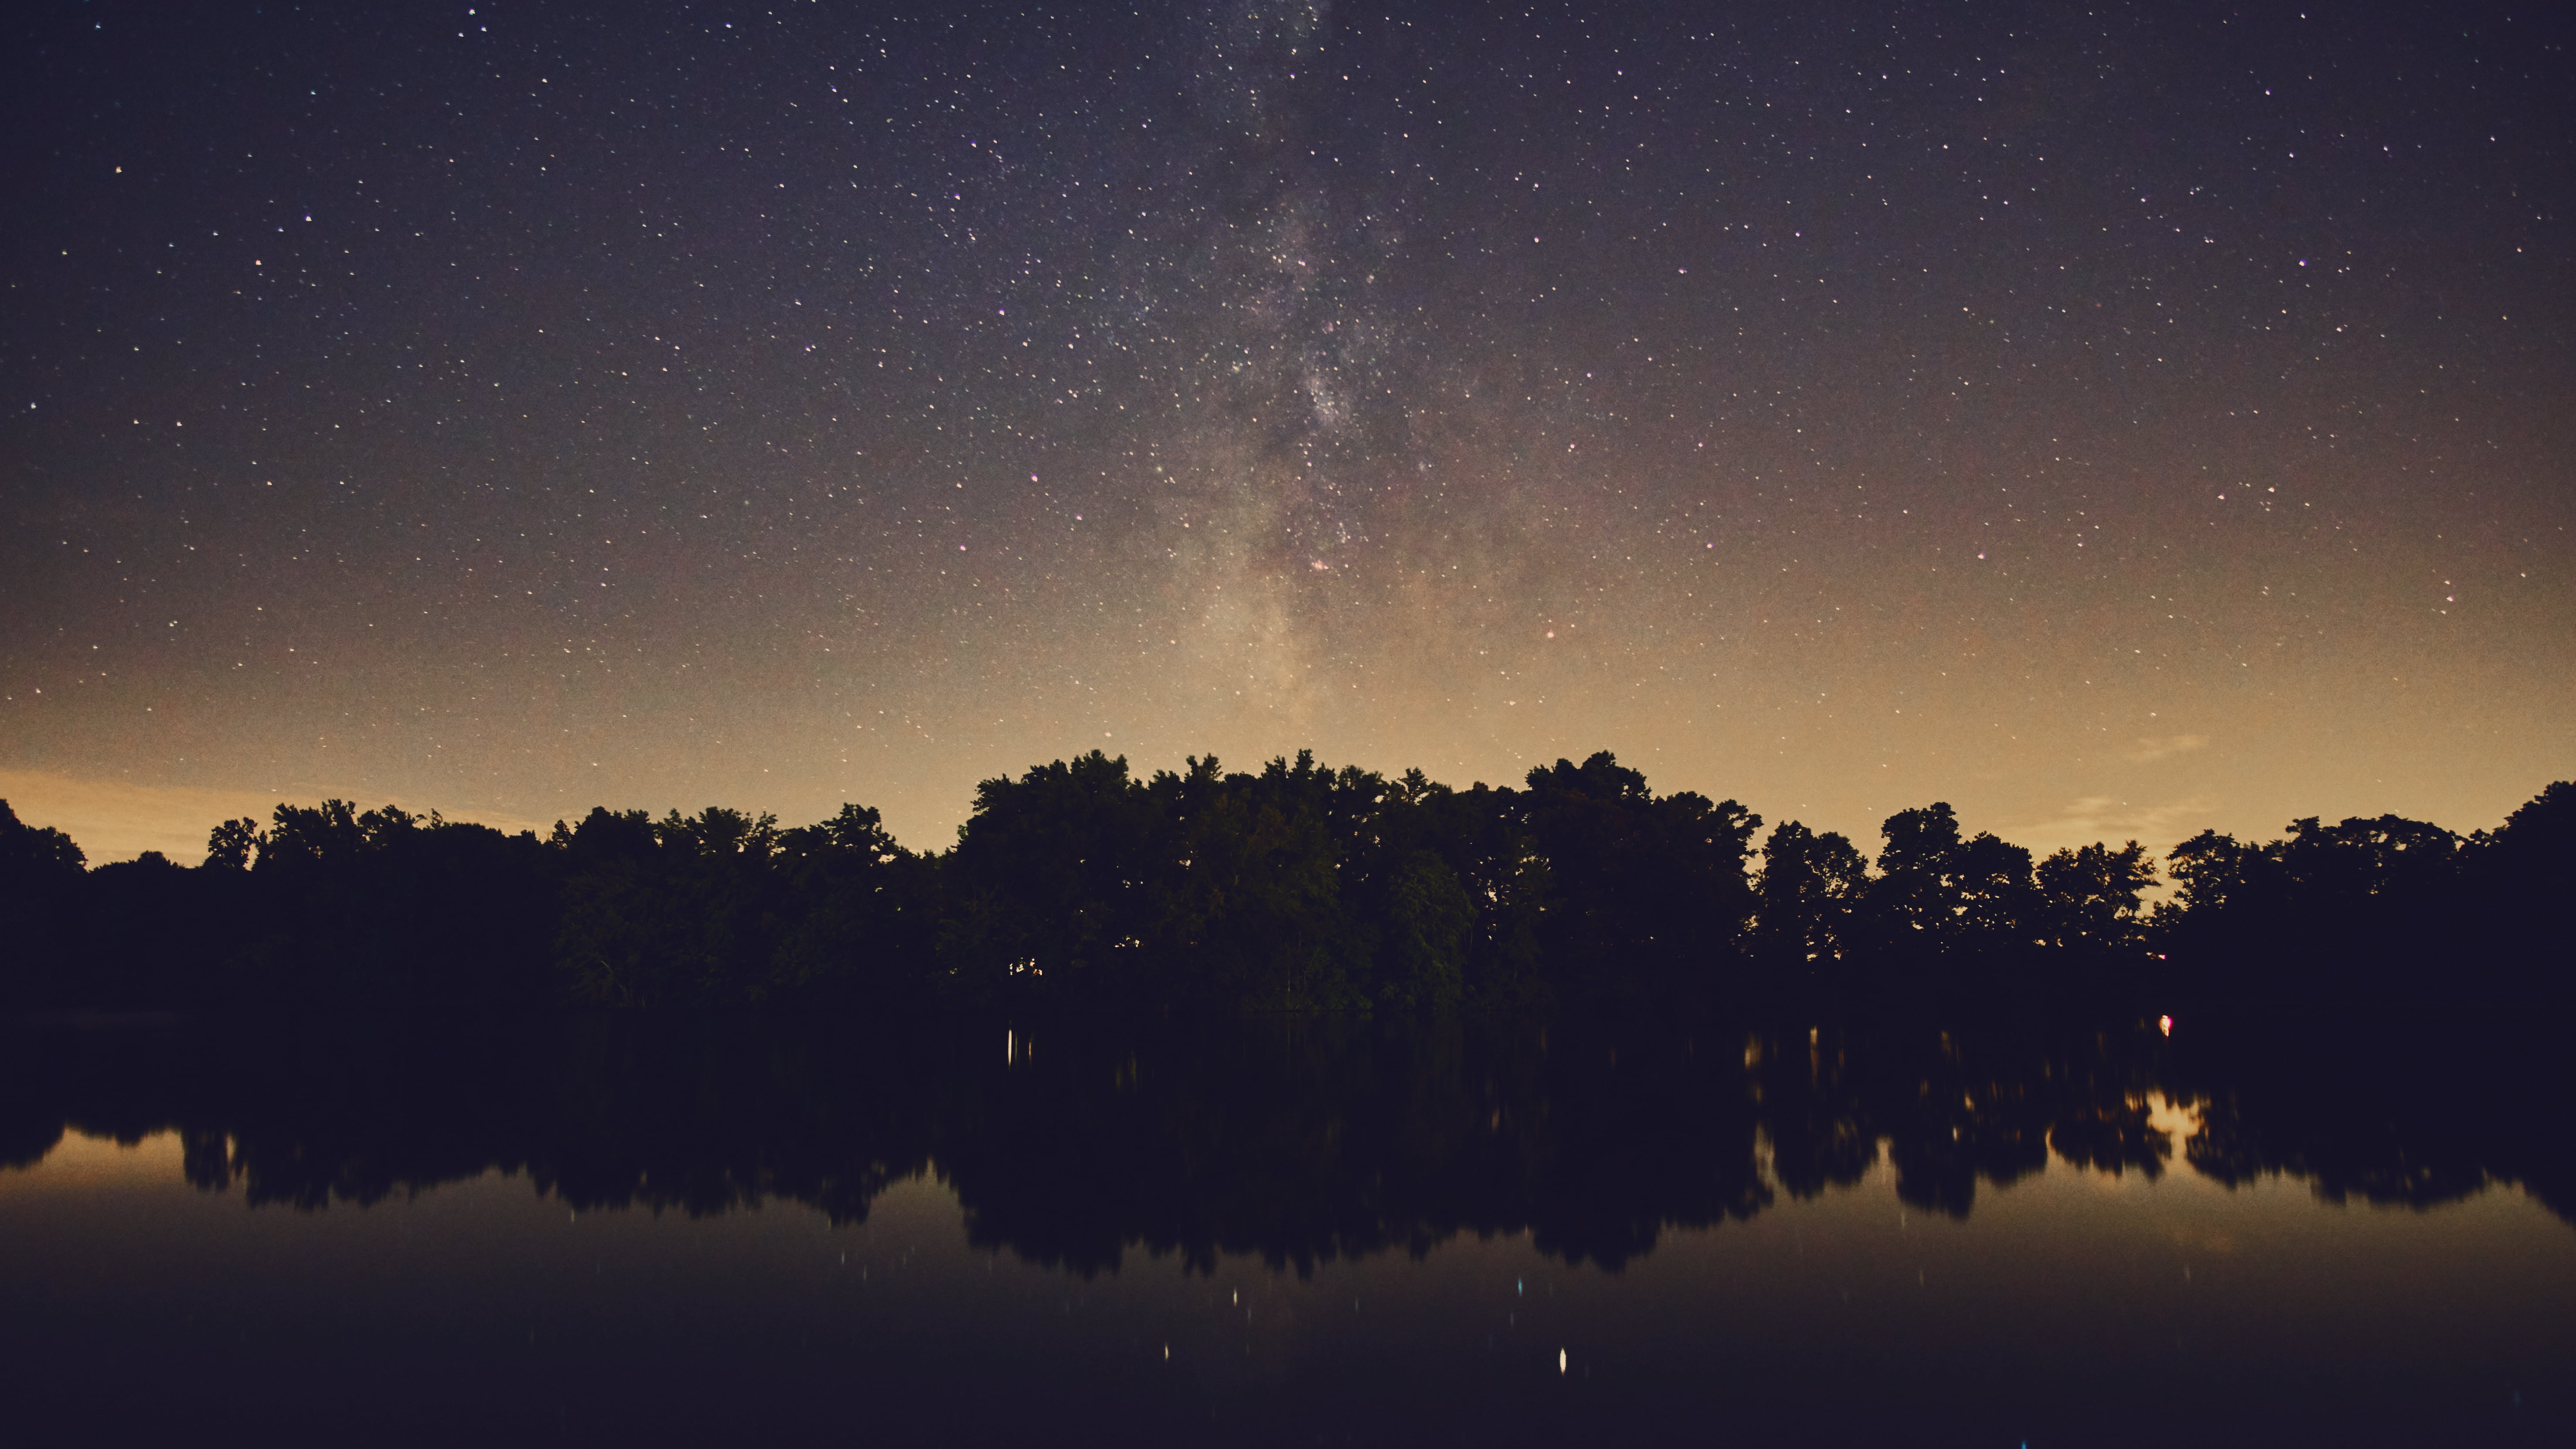 silhouette of trees near body of water, Milky Way, stars, nature